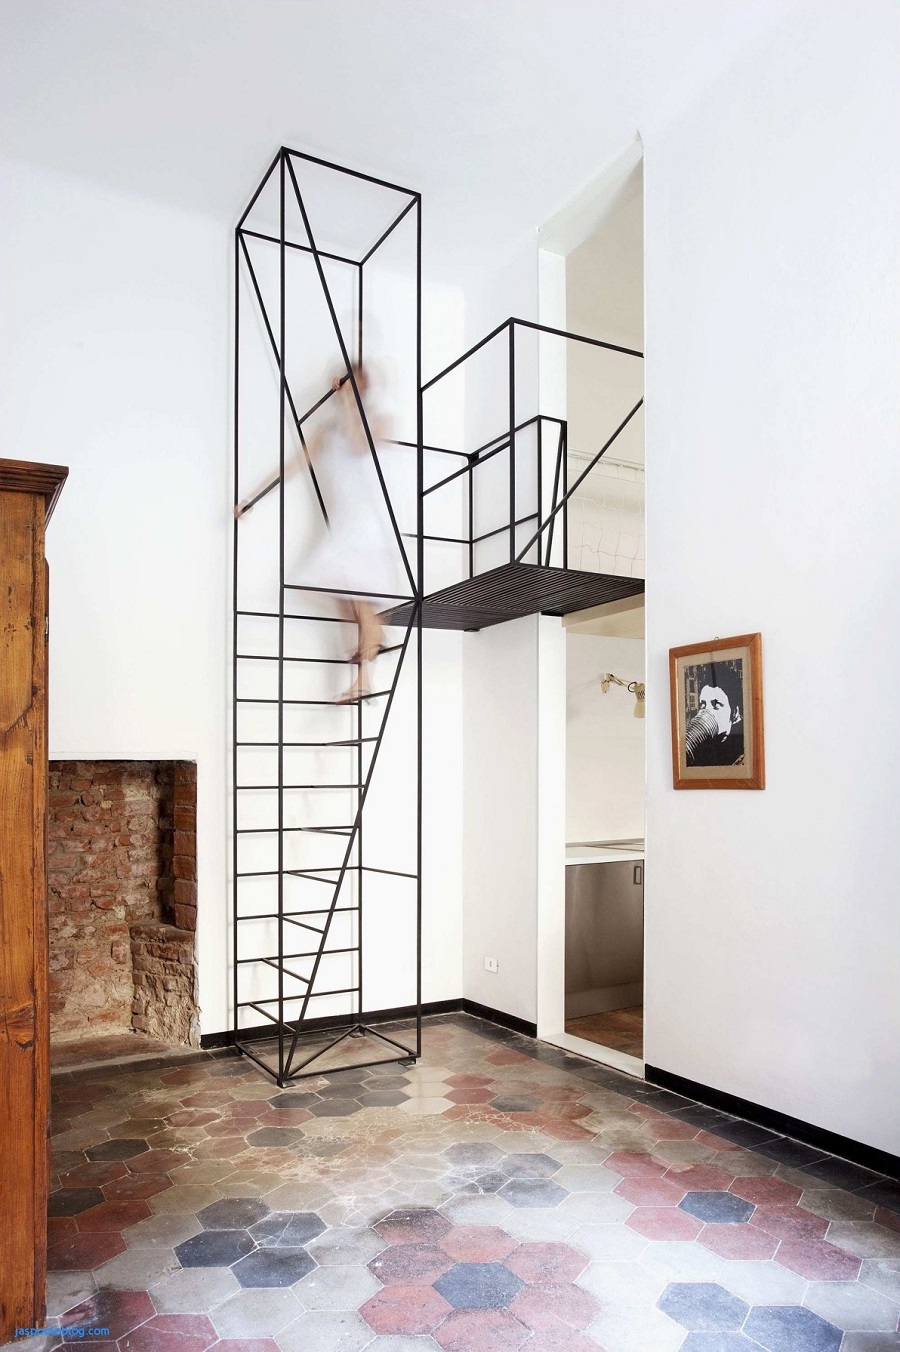 "Stairs" Designed By Francesco Librizzi. It's More Of A Treacherous Ladder. I'd Consider Going Up These. I would Not Be Interested In Going Down Them